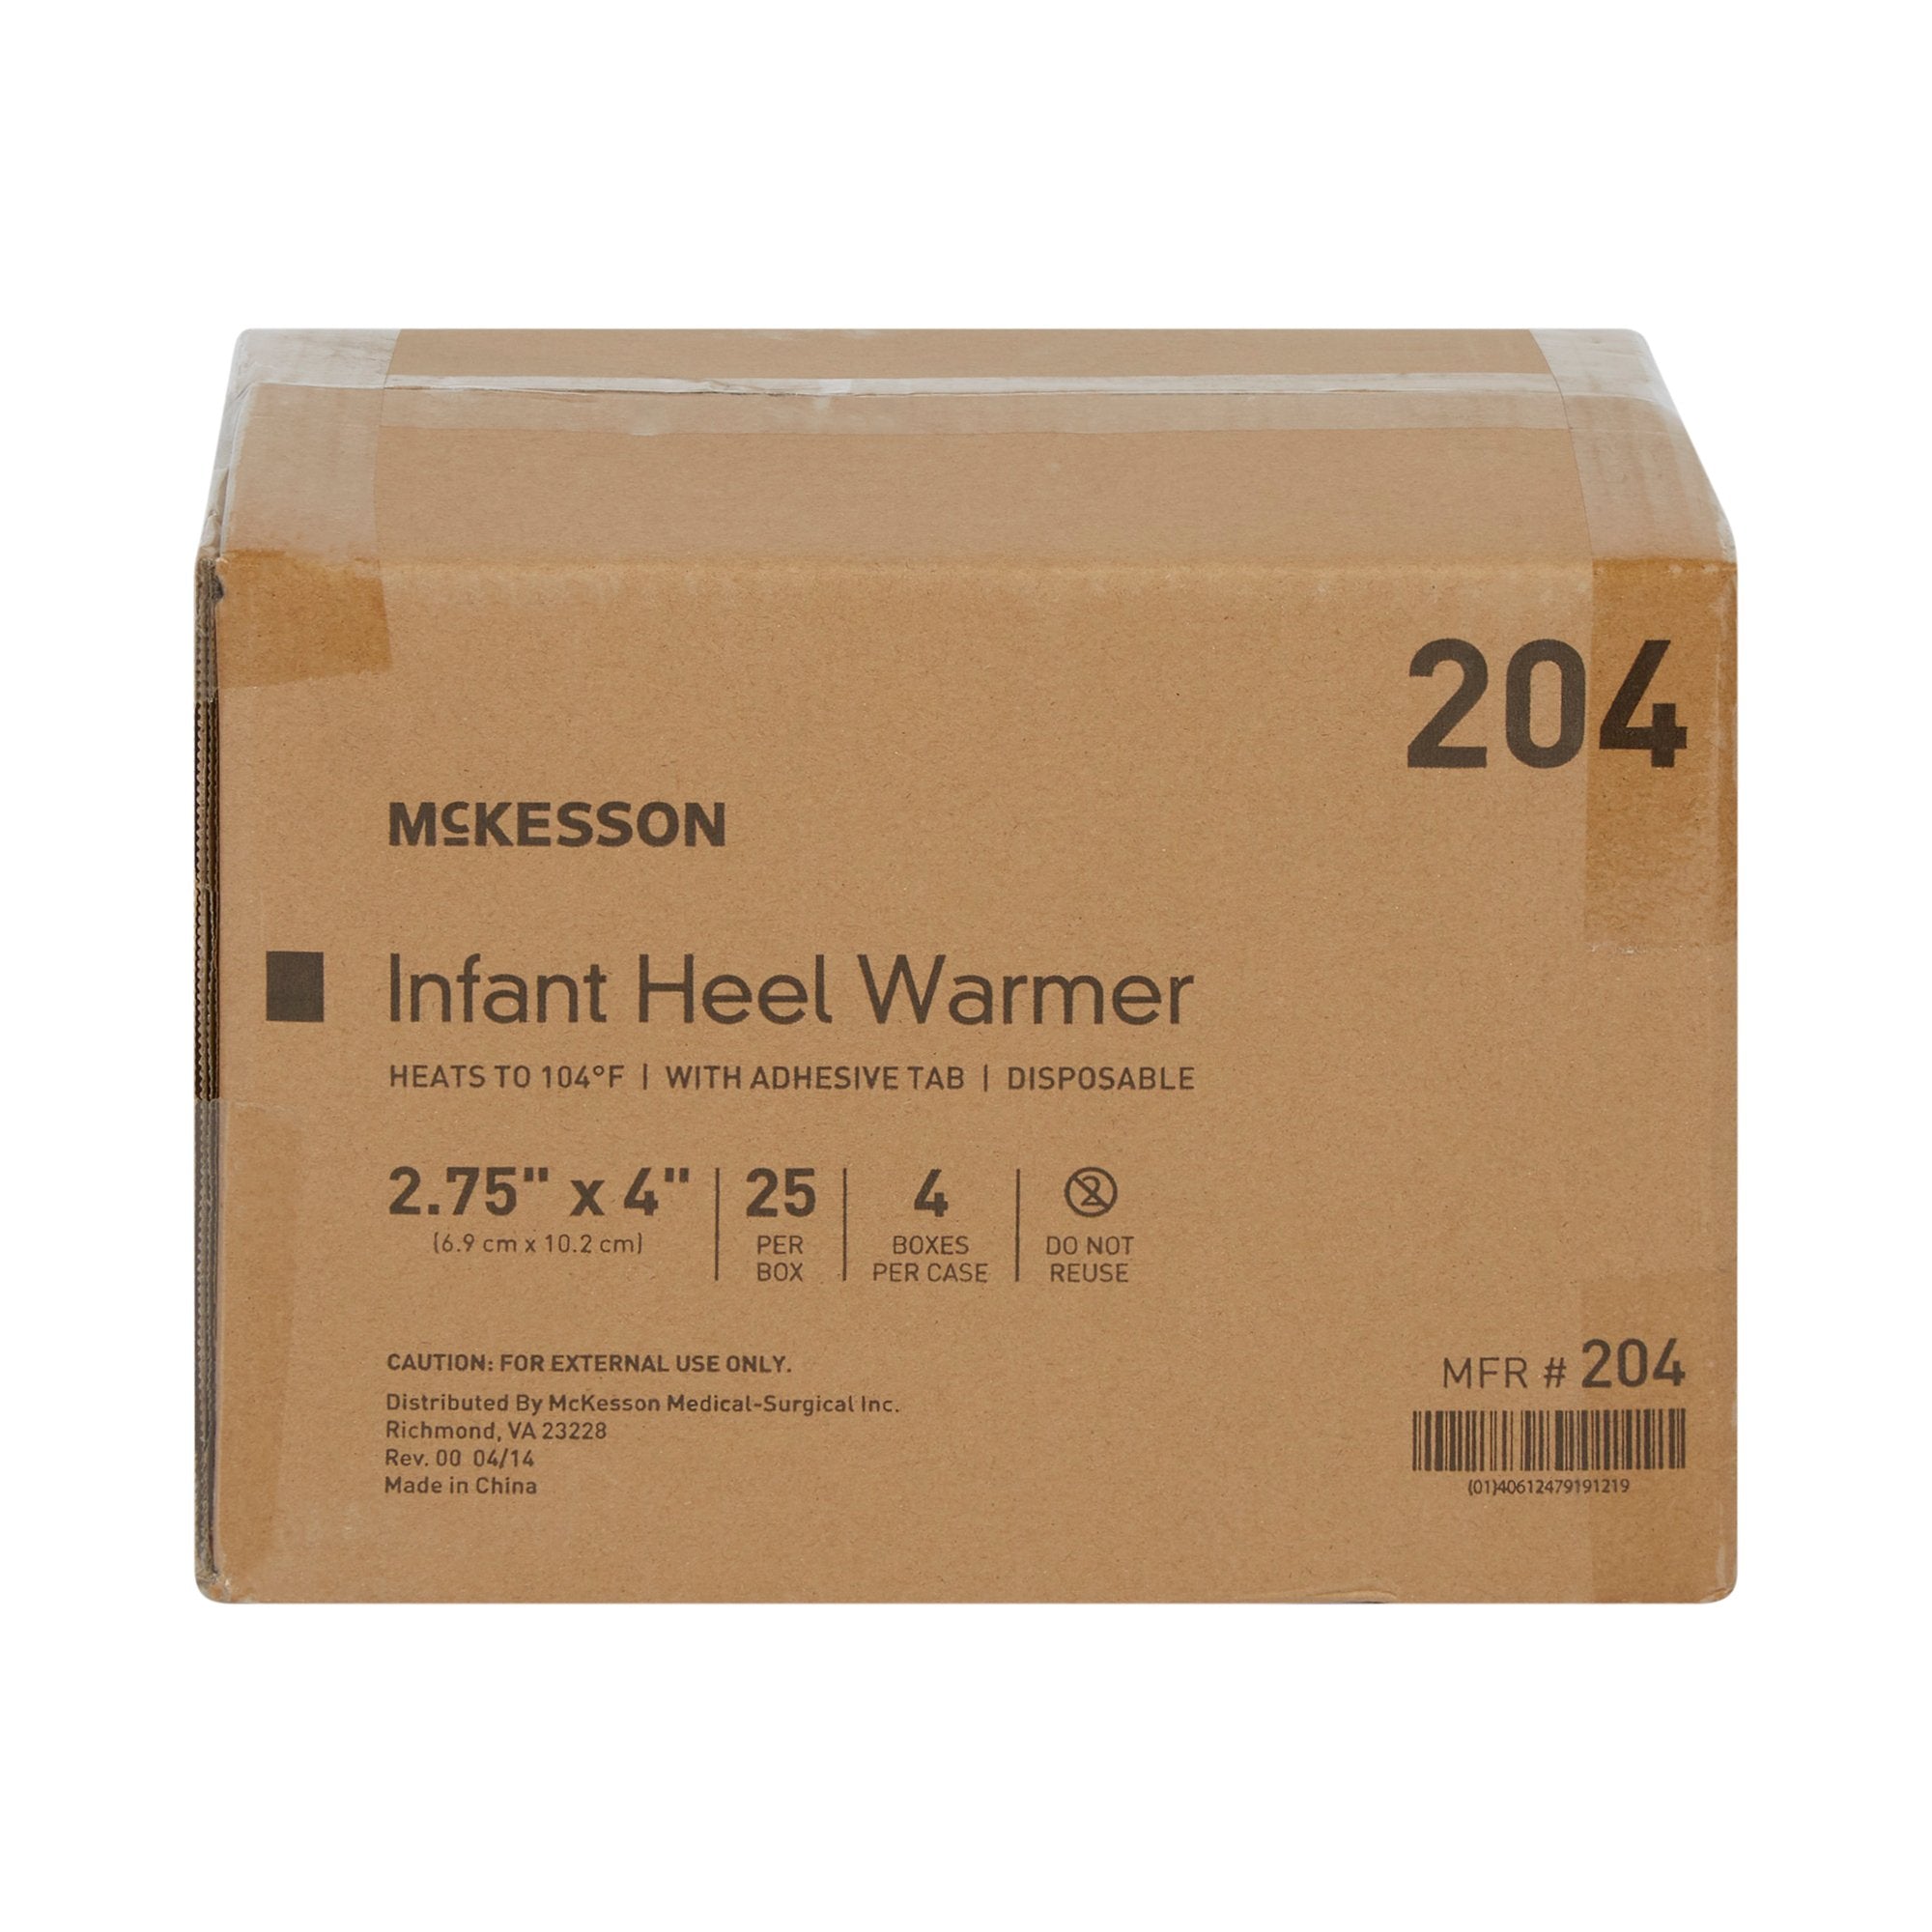 Instant Infant Heel Warmer McKesson Heel One Size Fits Most Sodium Acetate / Water Disposable